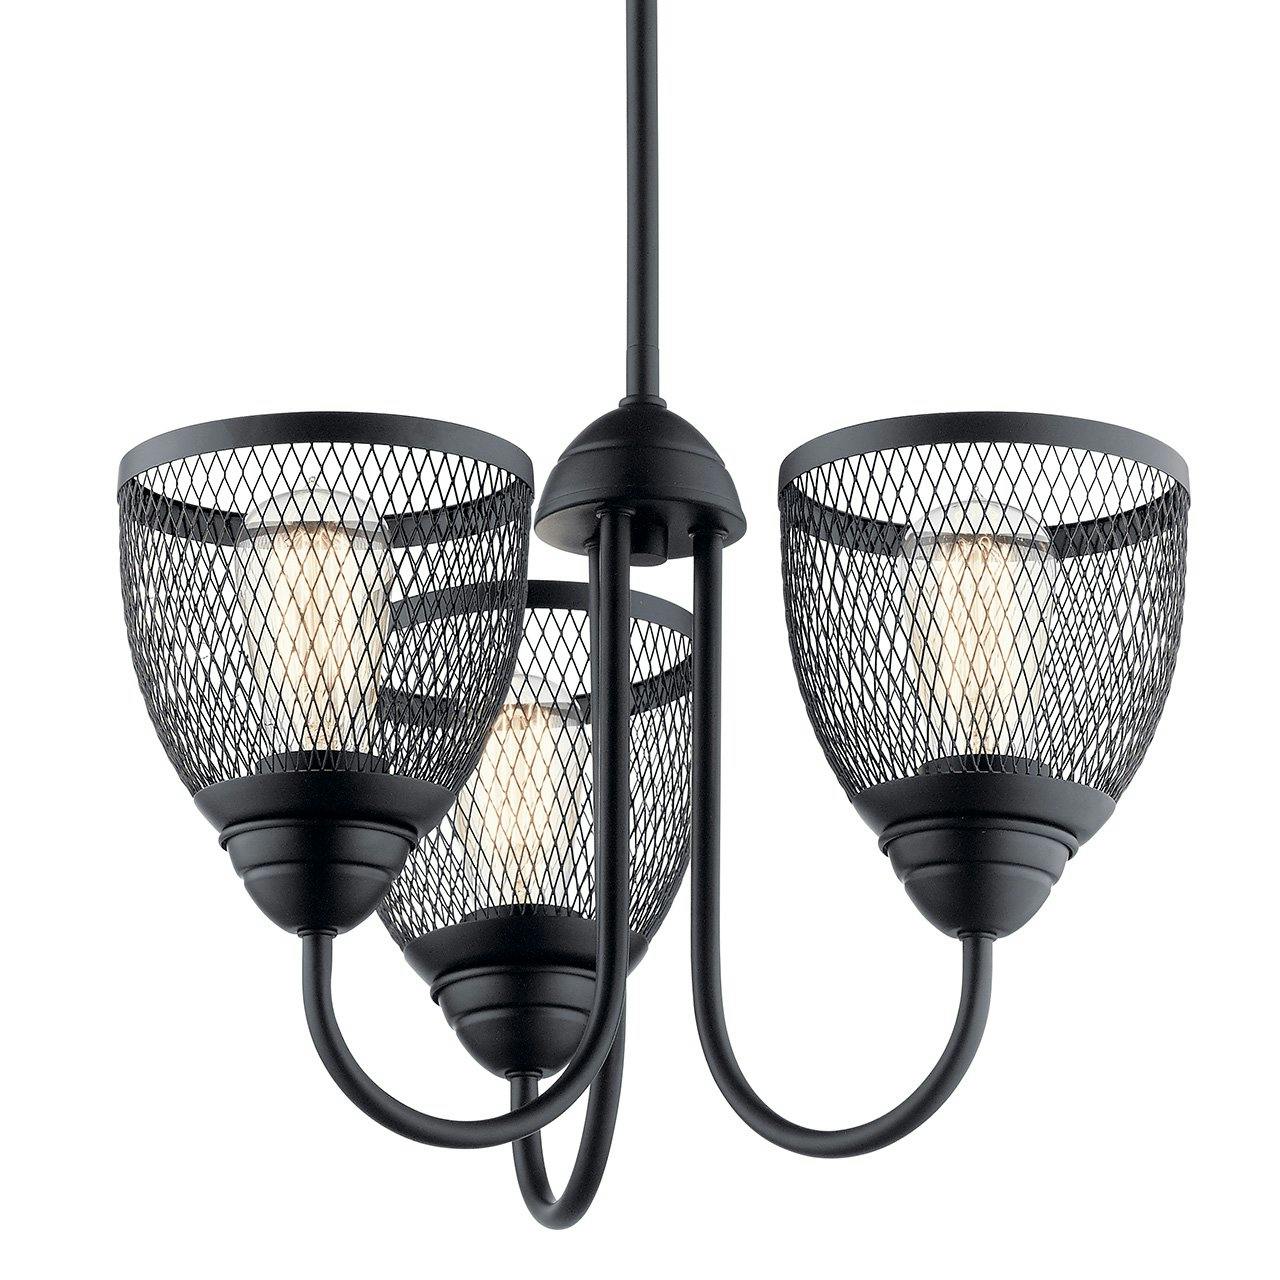 Voclain 12" Convertible Chandelier Black without the canopy on a white background